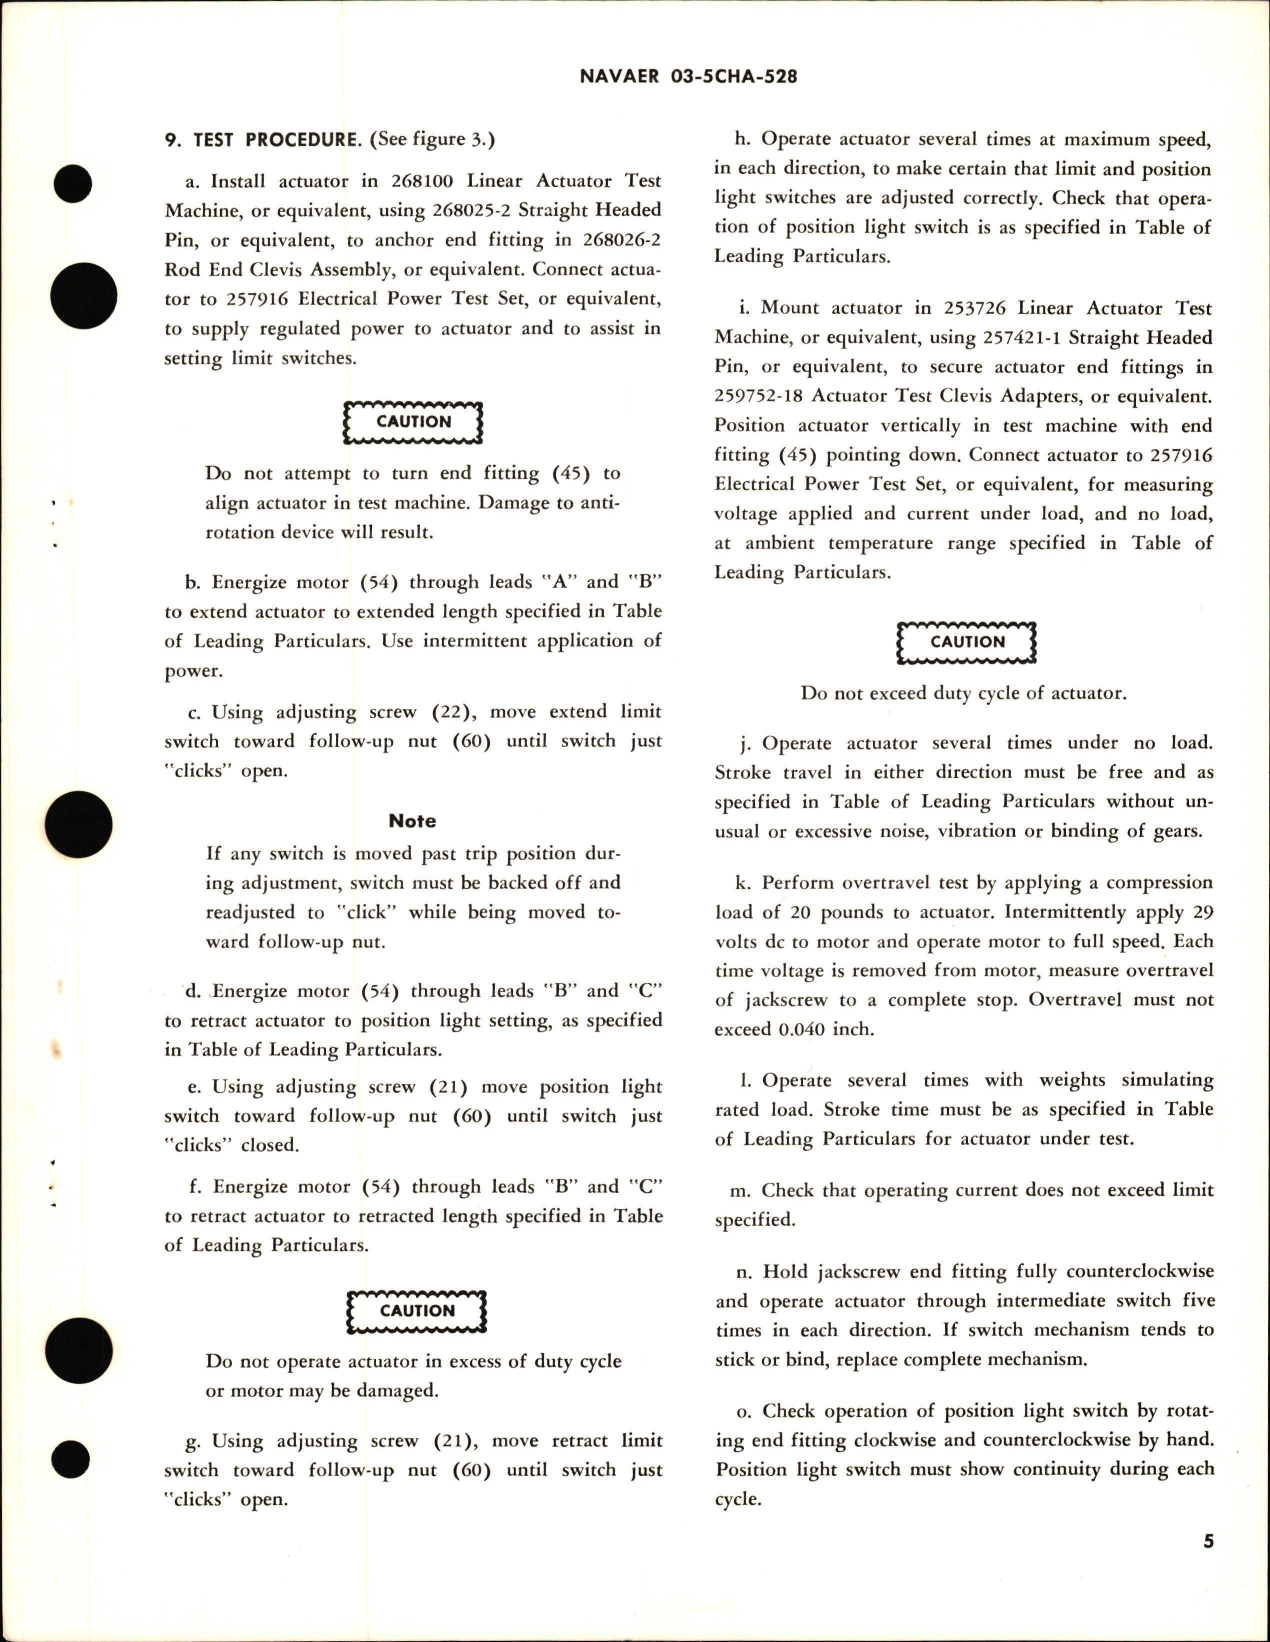 Sample page 5 from AirCorps Library document: Overhaul Instructions with Parts Breakdown for Electromechanical Linear Actuator - Part 525202 